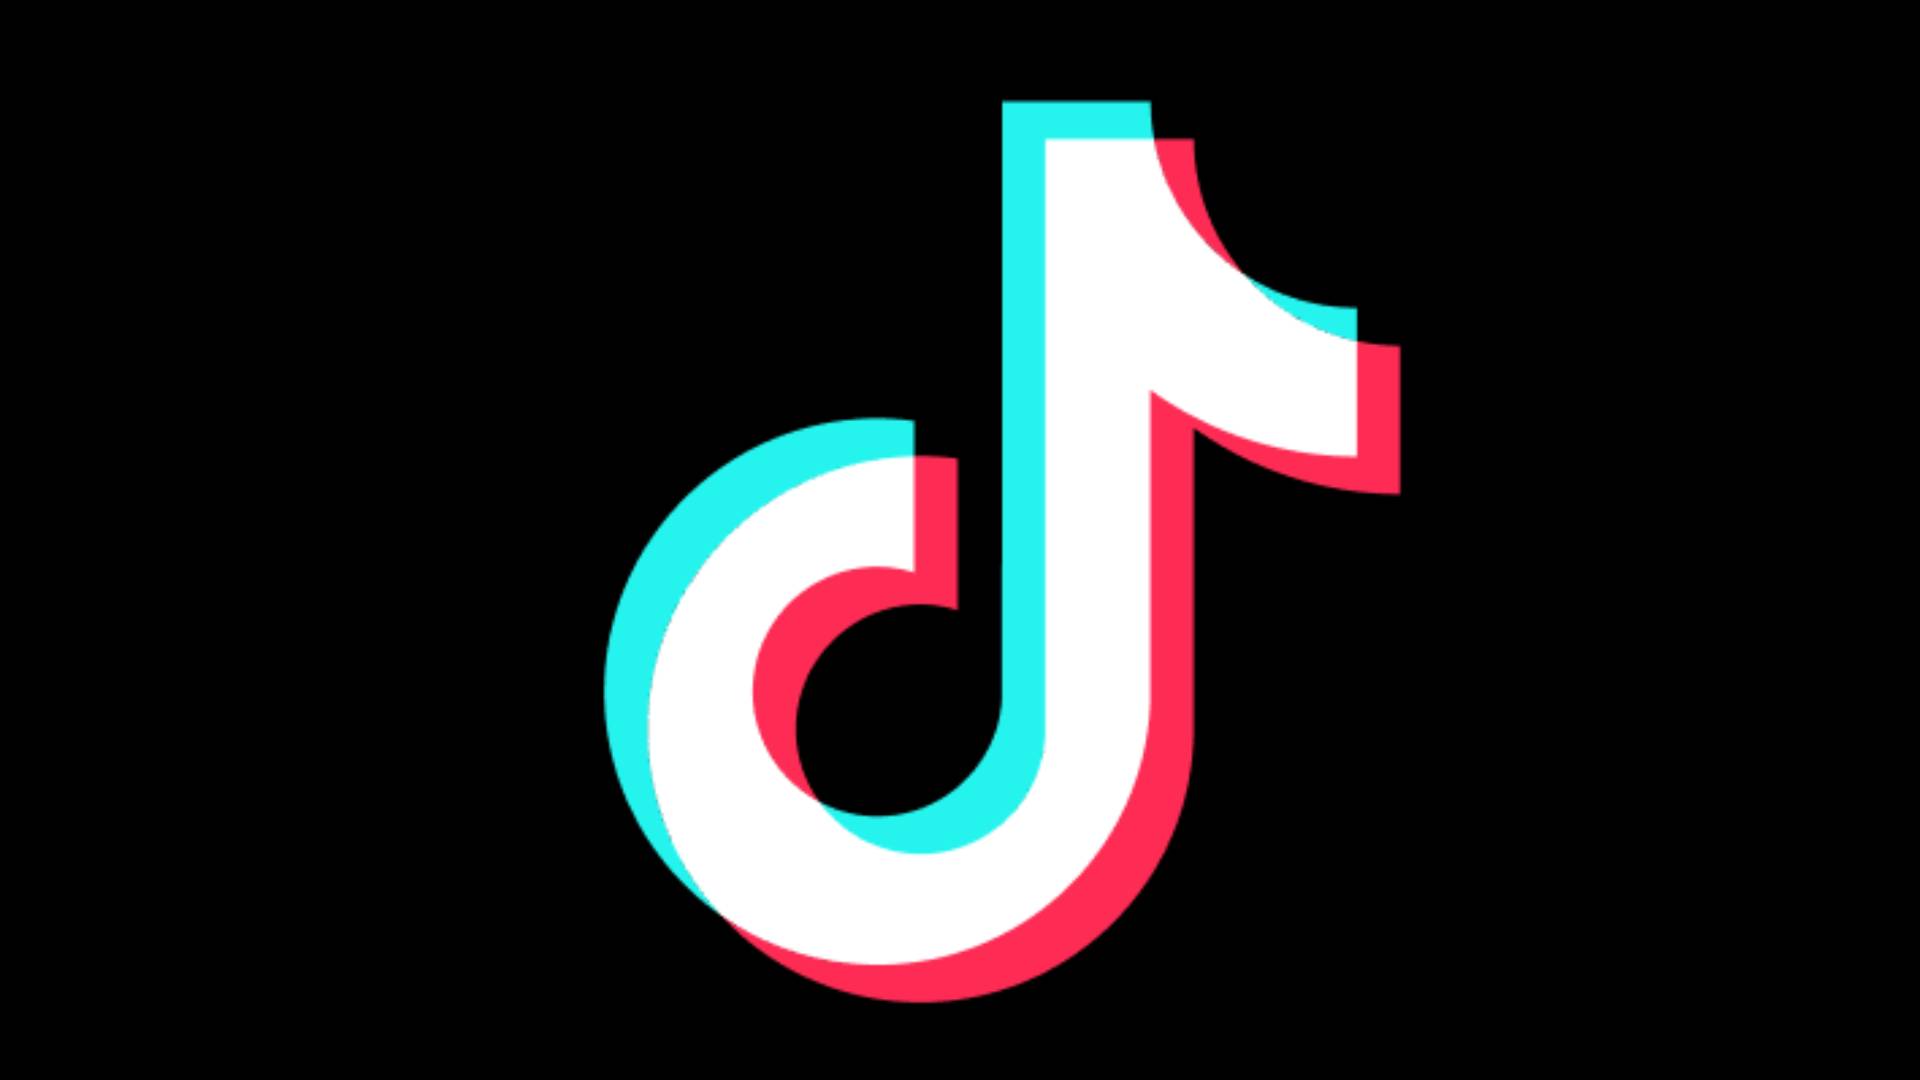 Americans divided on TikTok ban even as Biden campaign joins the app, AP-NORC poll shows